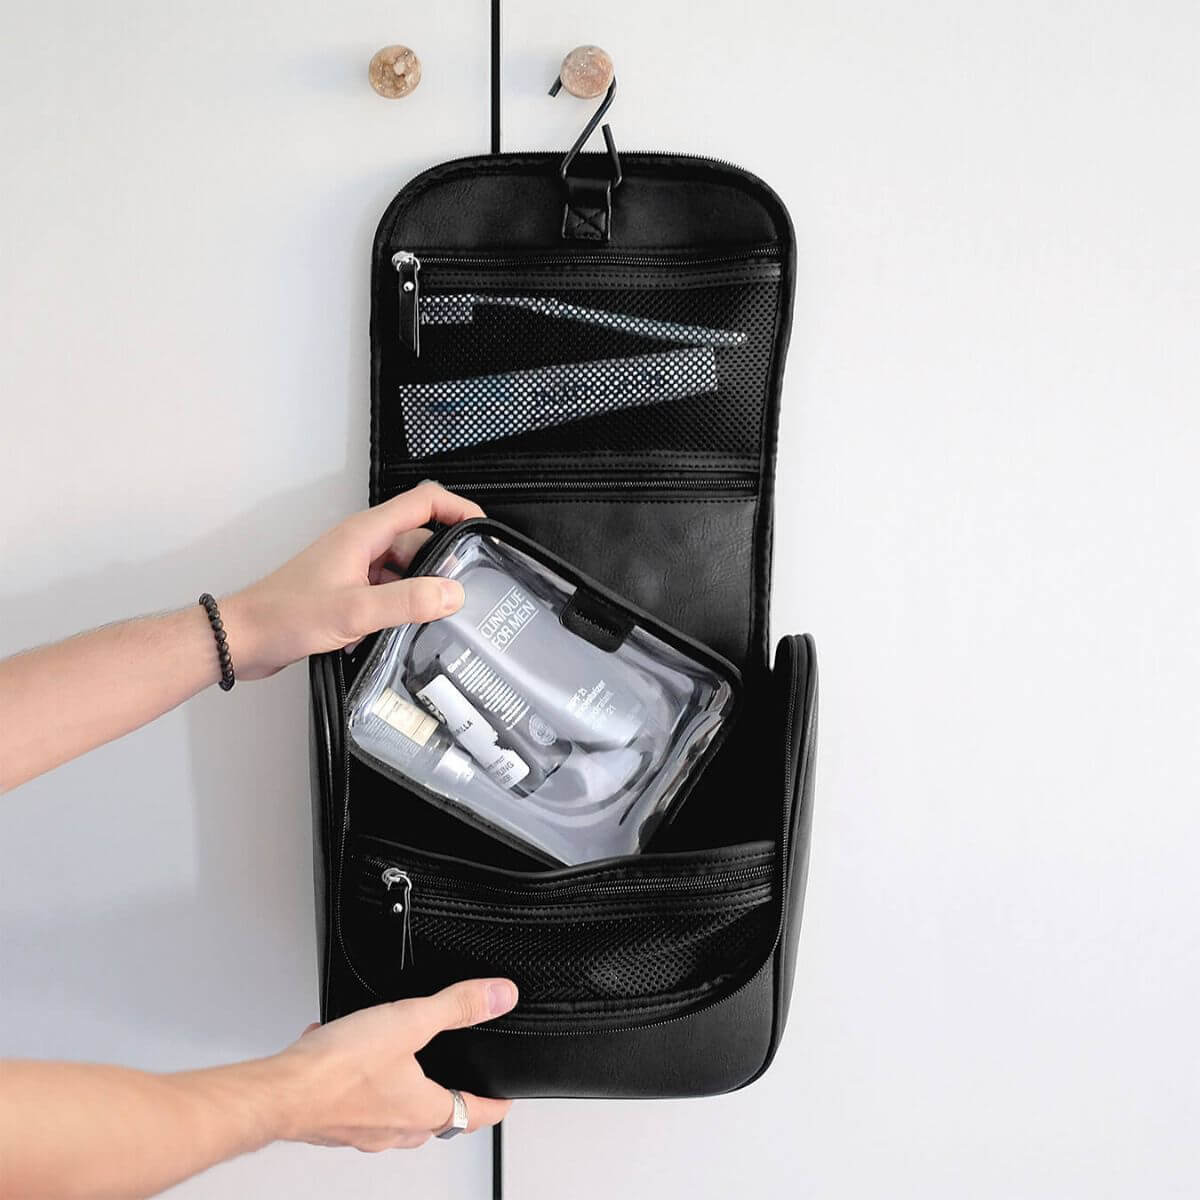 Black leather travel toiletry bag with travel items inside